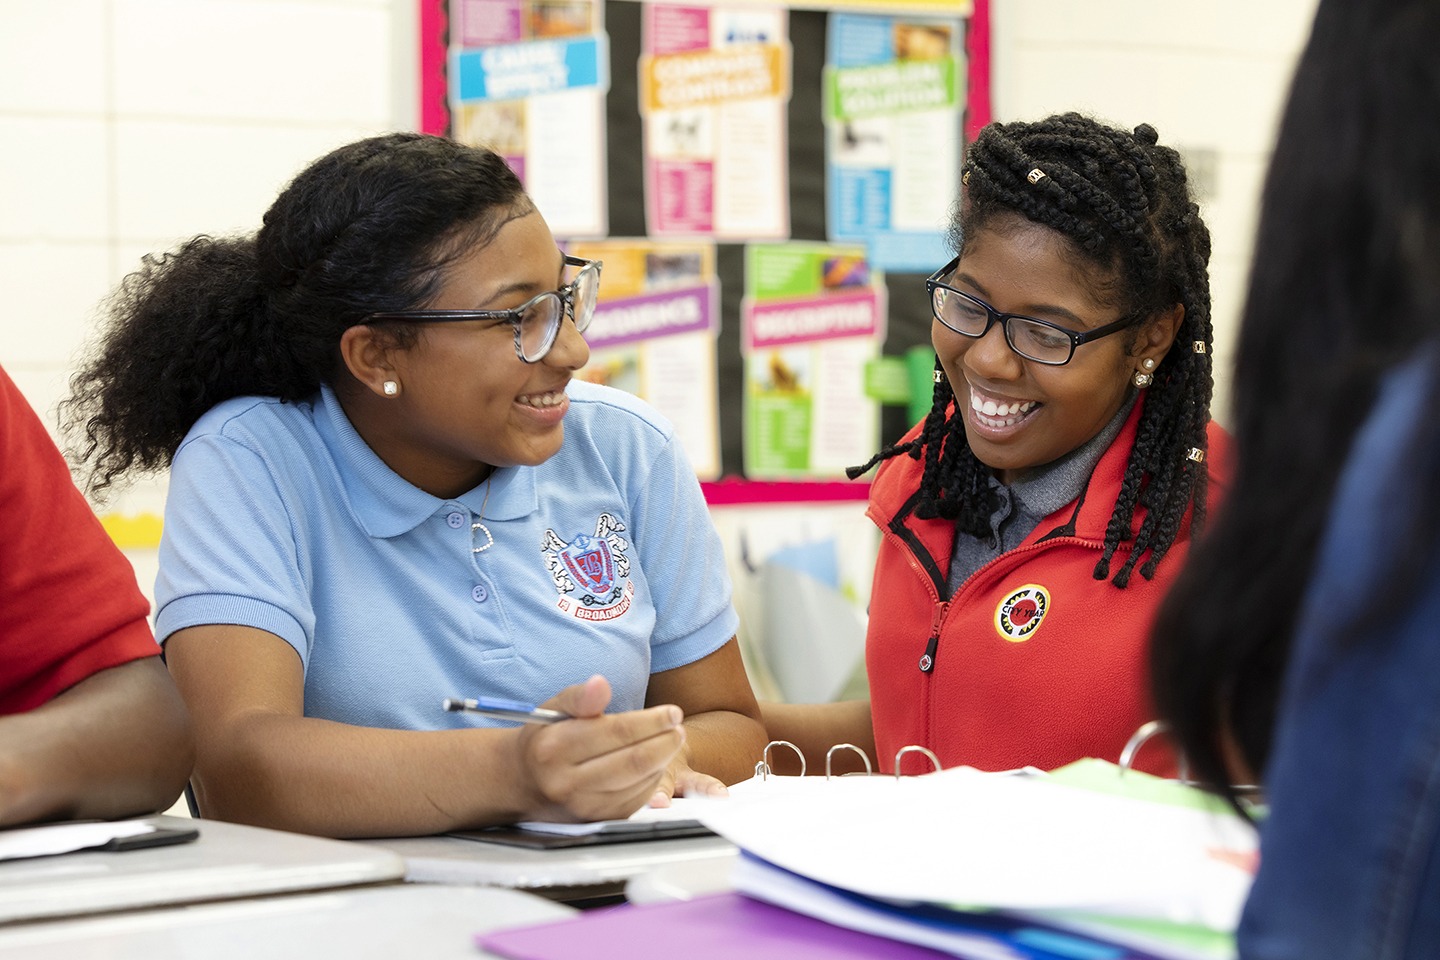 a student smiles and looks at an AmeriCorps member as they sit together at a table doing work